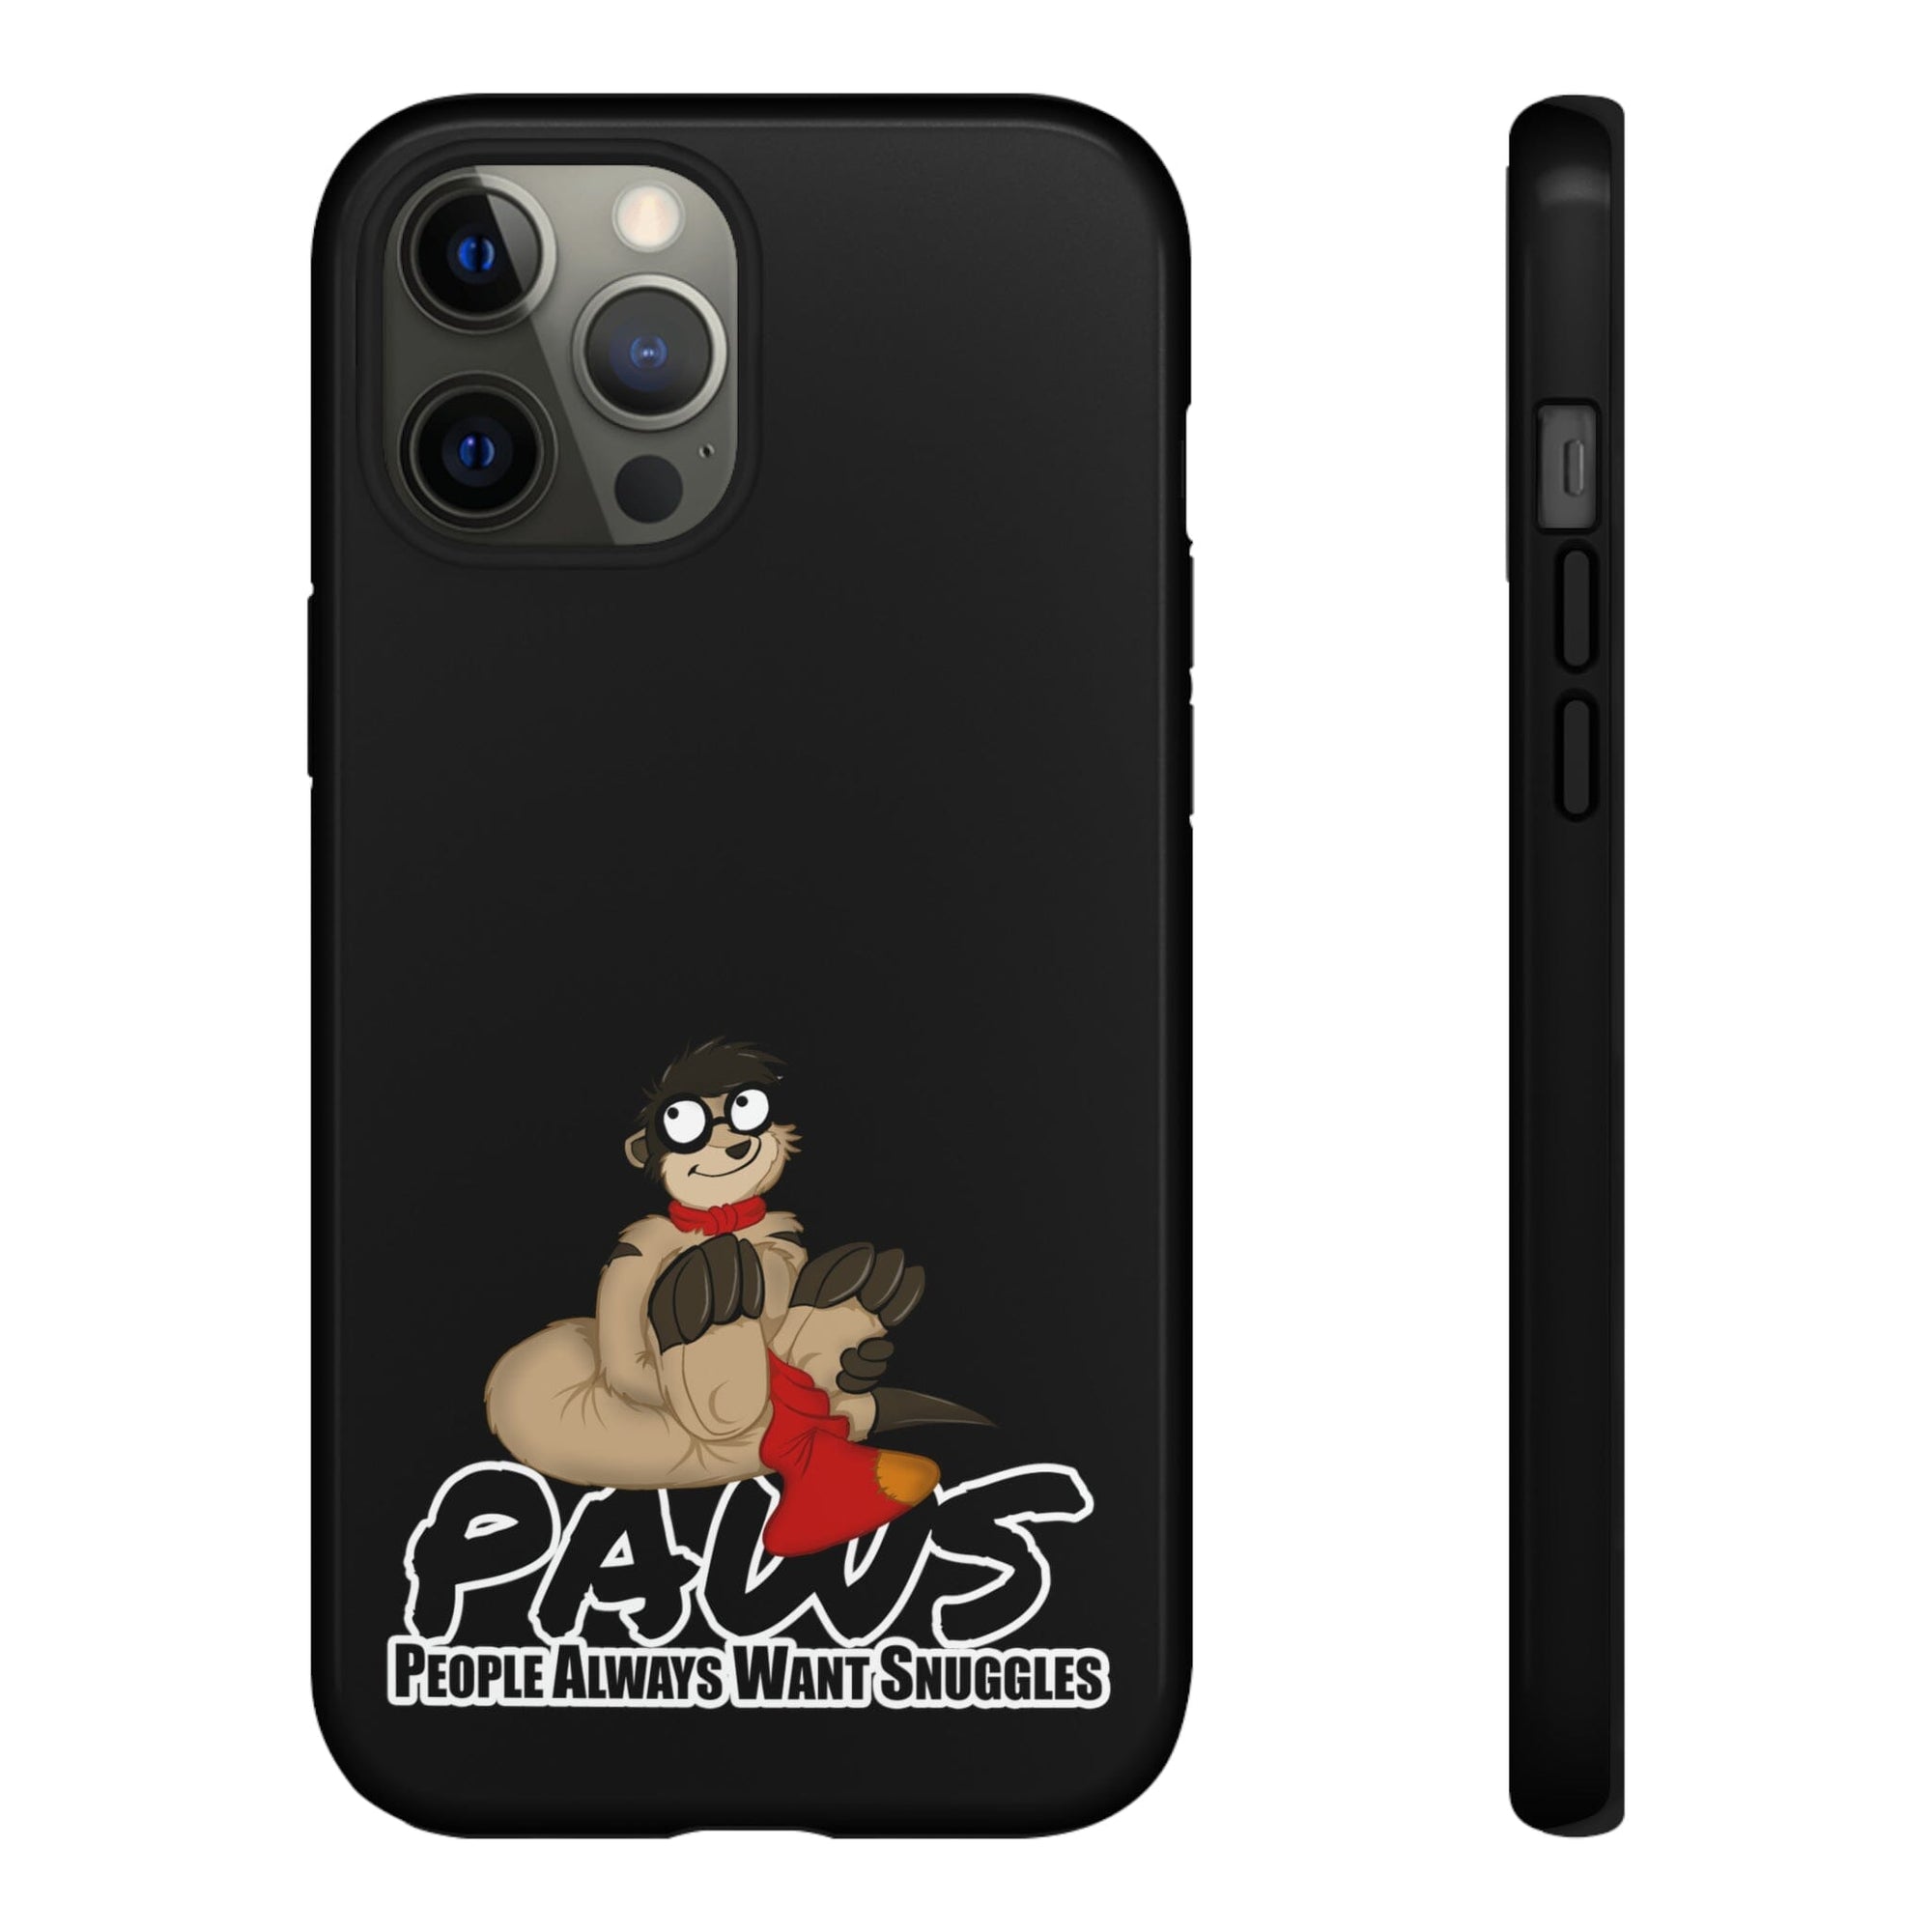 Thabo Meerkat - PAWS - Phone Case Phone Case Thabo Meerkat Glossy iPhone 12 Pro Max 